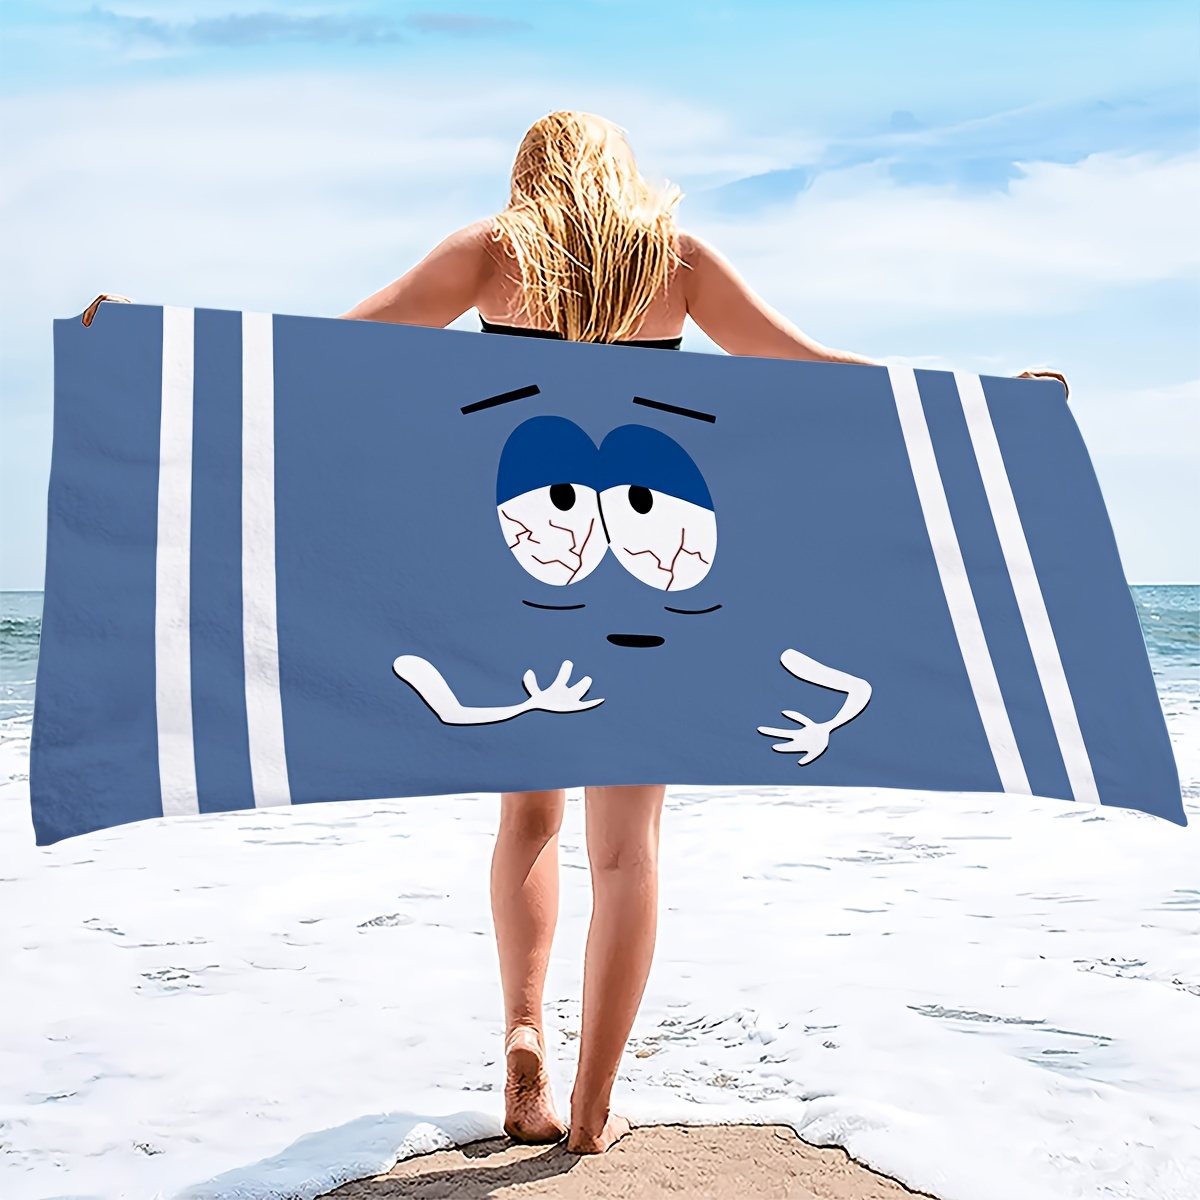 

Extra-large Microfiber Beach Towel - Sand-free, Quick-dry, Lightweight With Cartoon Design For Swimming, Gym & Pool Use